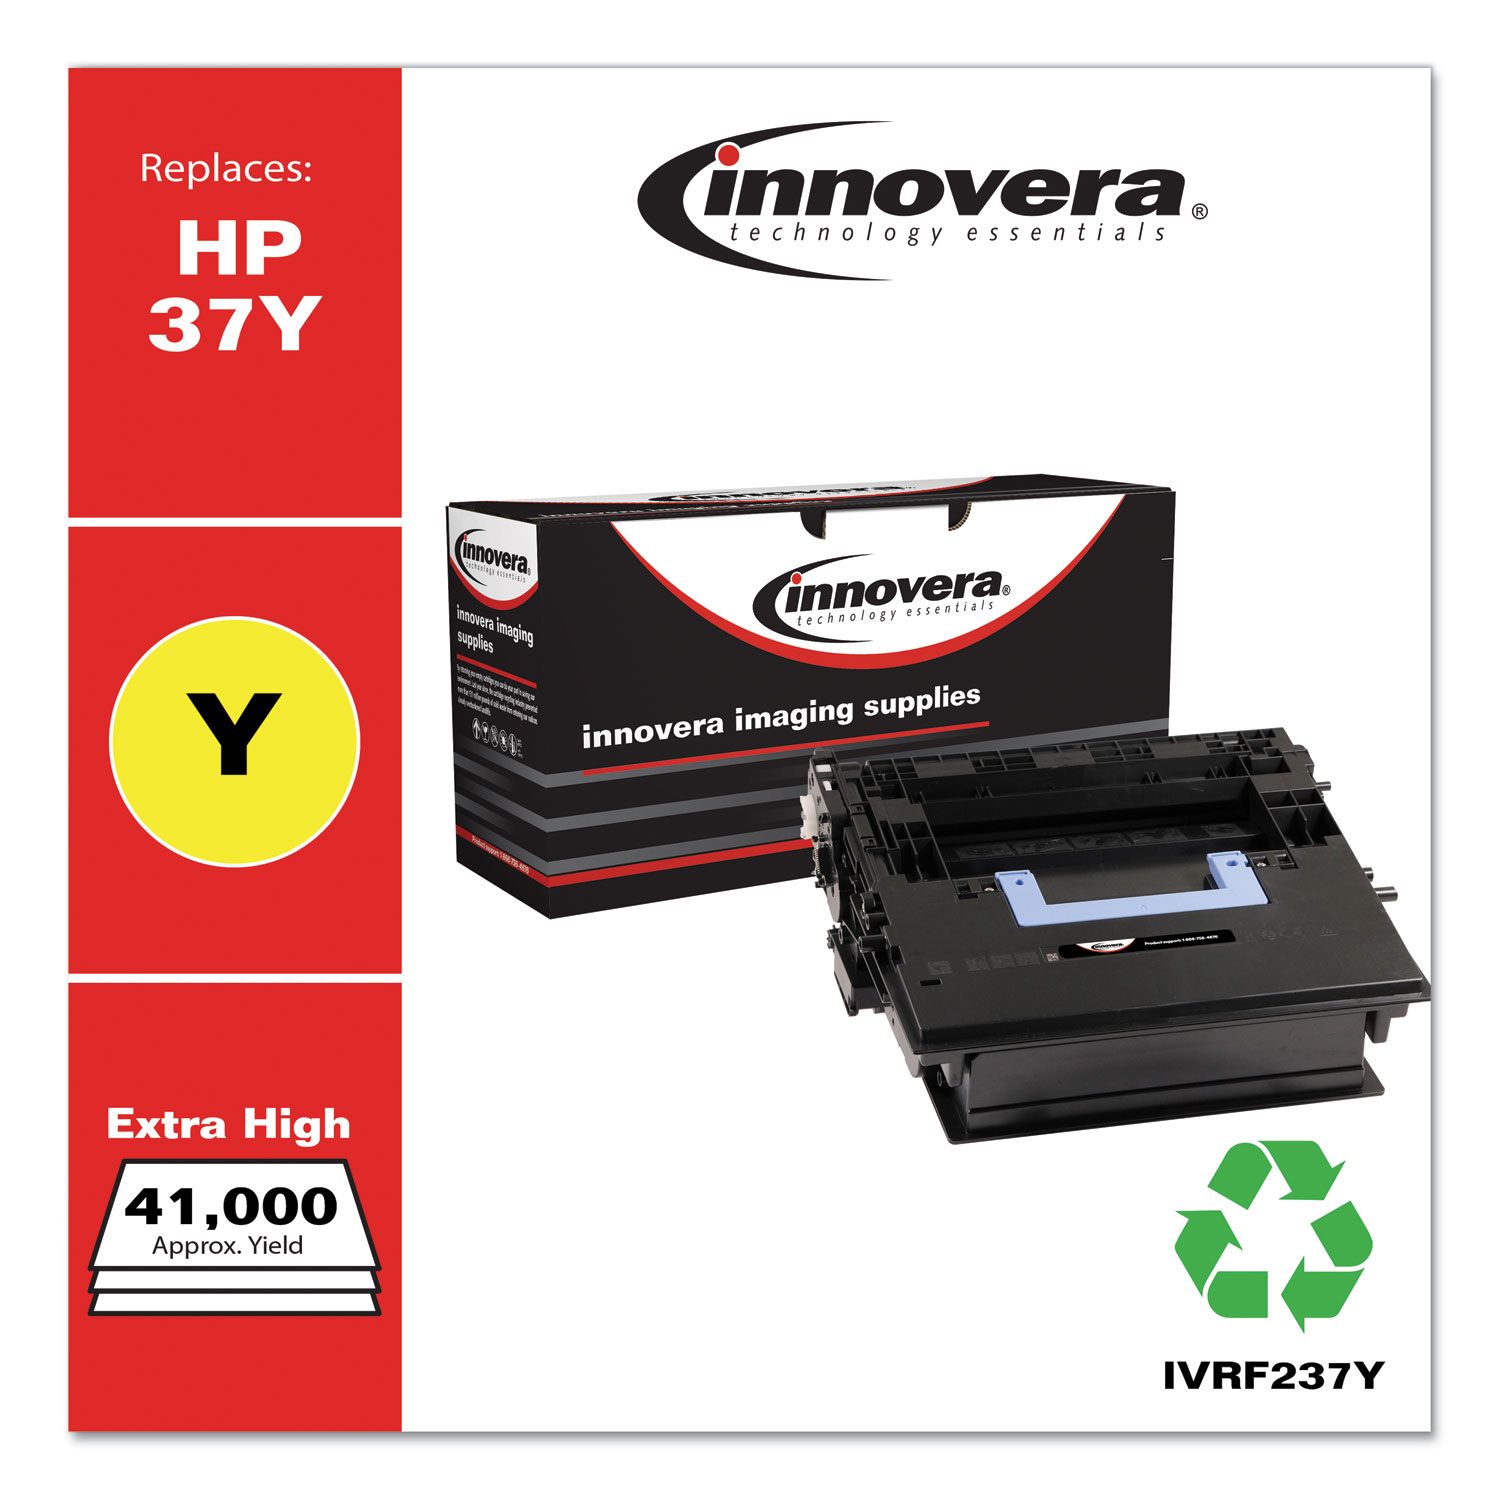  Innovera IVRF237Y Remanufactured Black Extra High-Yield Toner, Replacement for HP 37Y (CF237Y), 41,000 Page-Yield (IVRF237Y) 